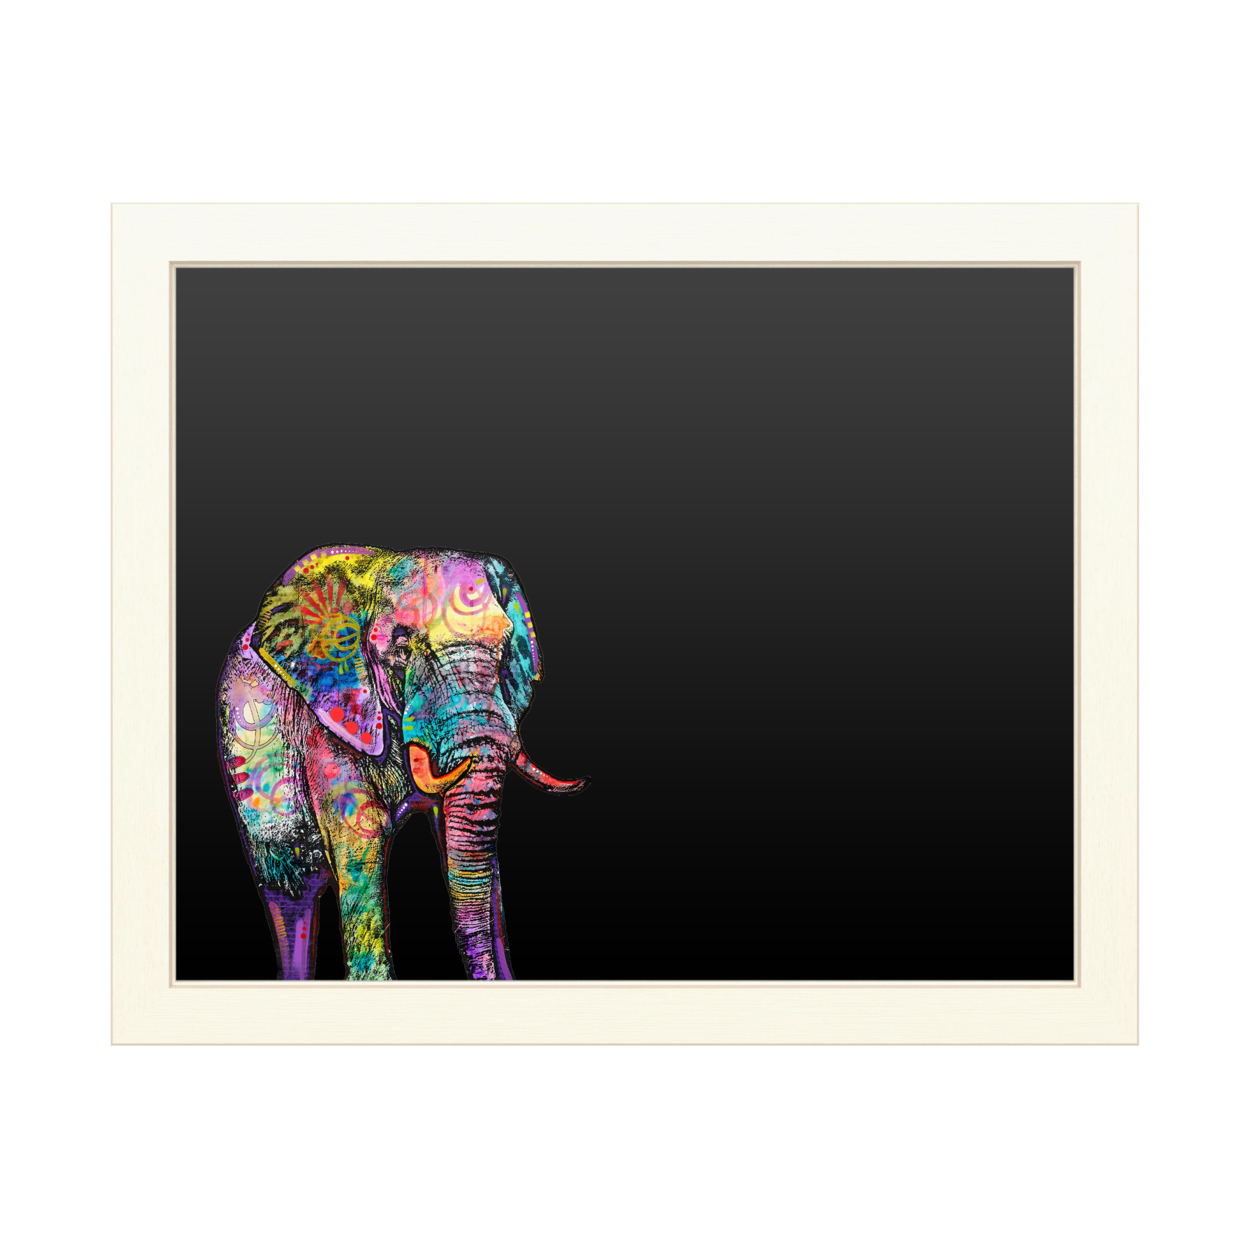 16 X 20 Chalk Board With Printed Artwork - Dean Russo Elephant White Board - Ready To Hang Chalkboard